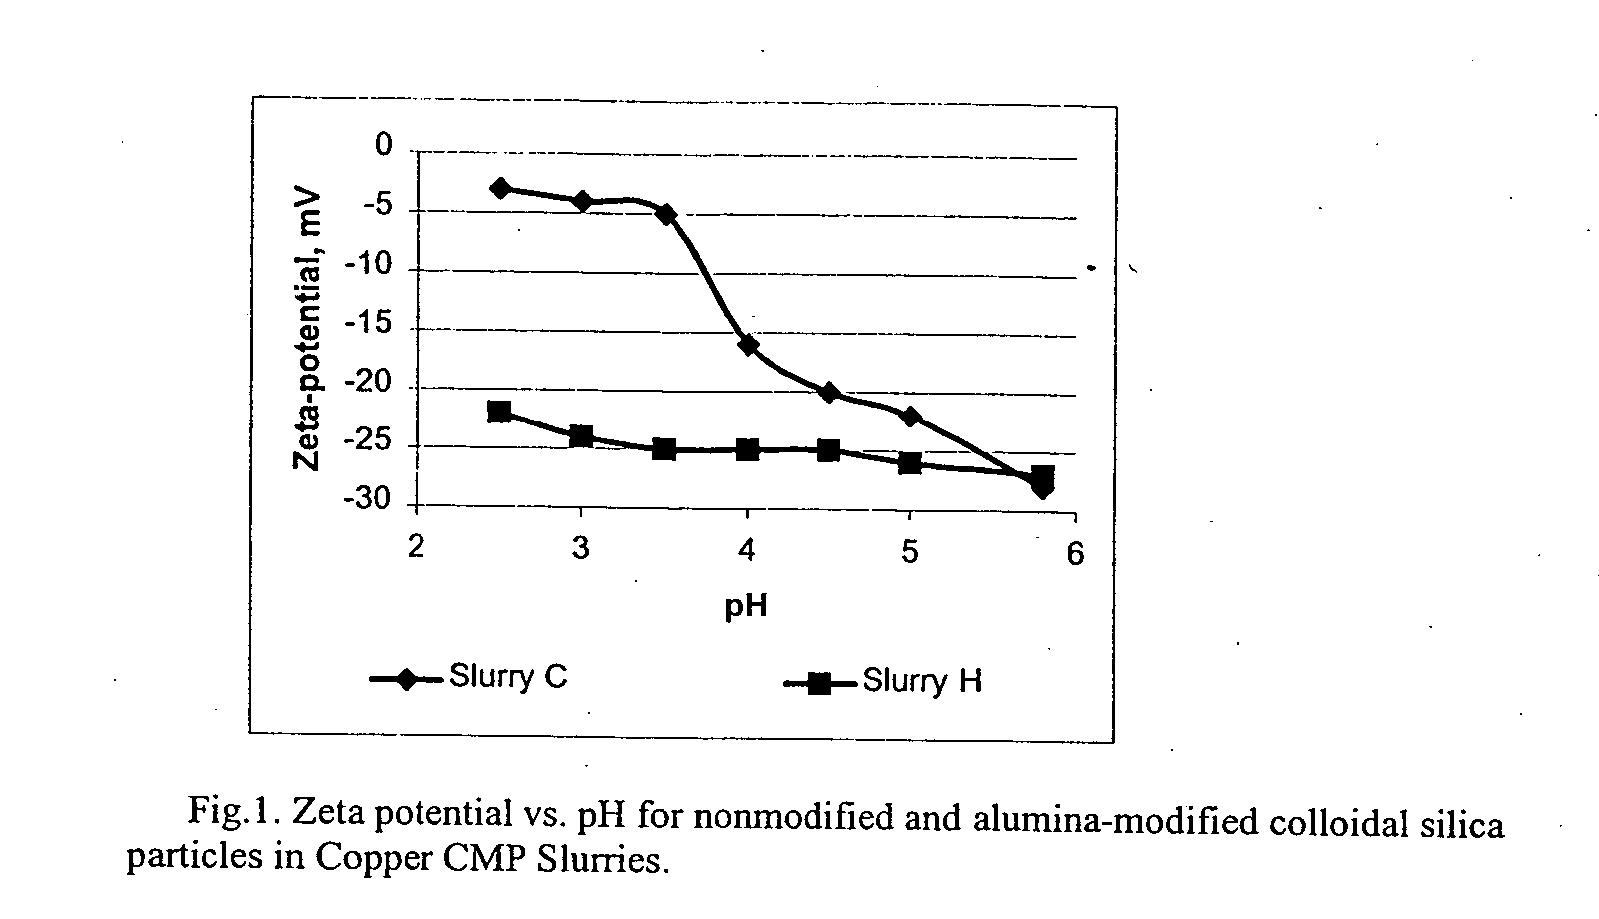 Aqueous slurry containing metallate-modified silica particles